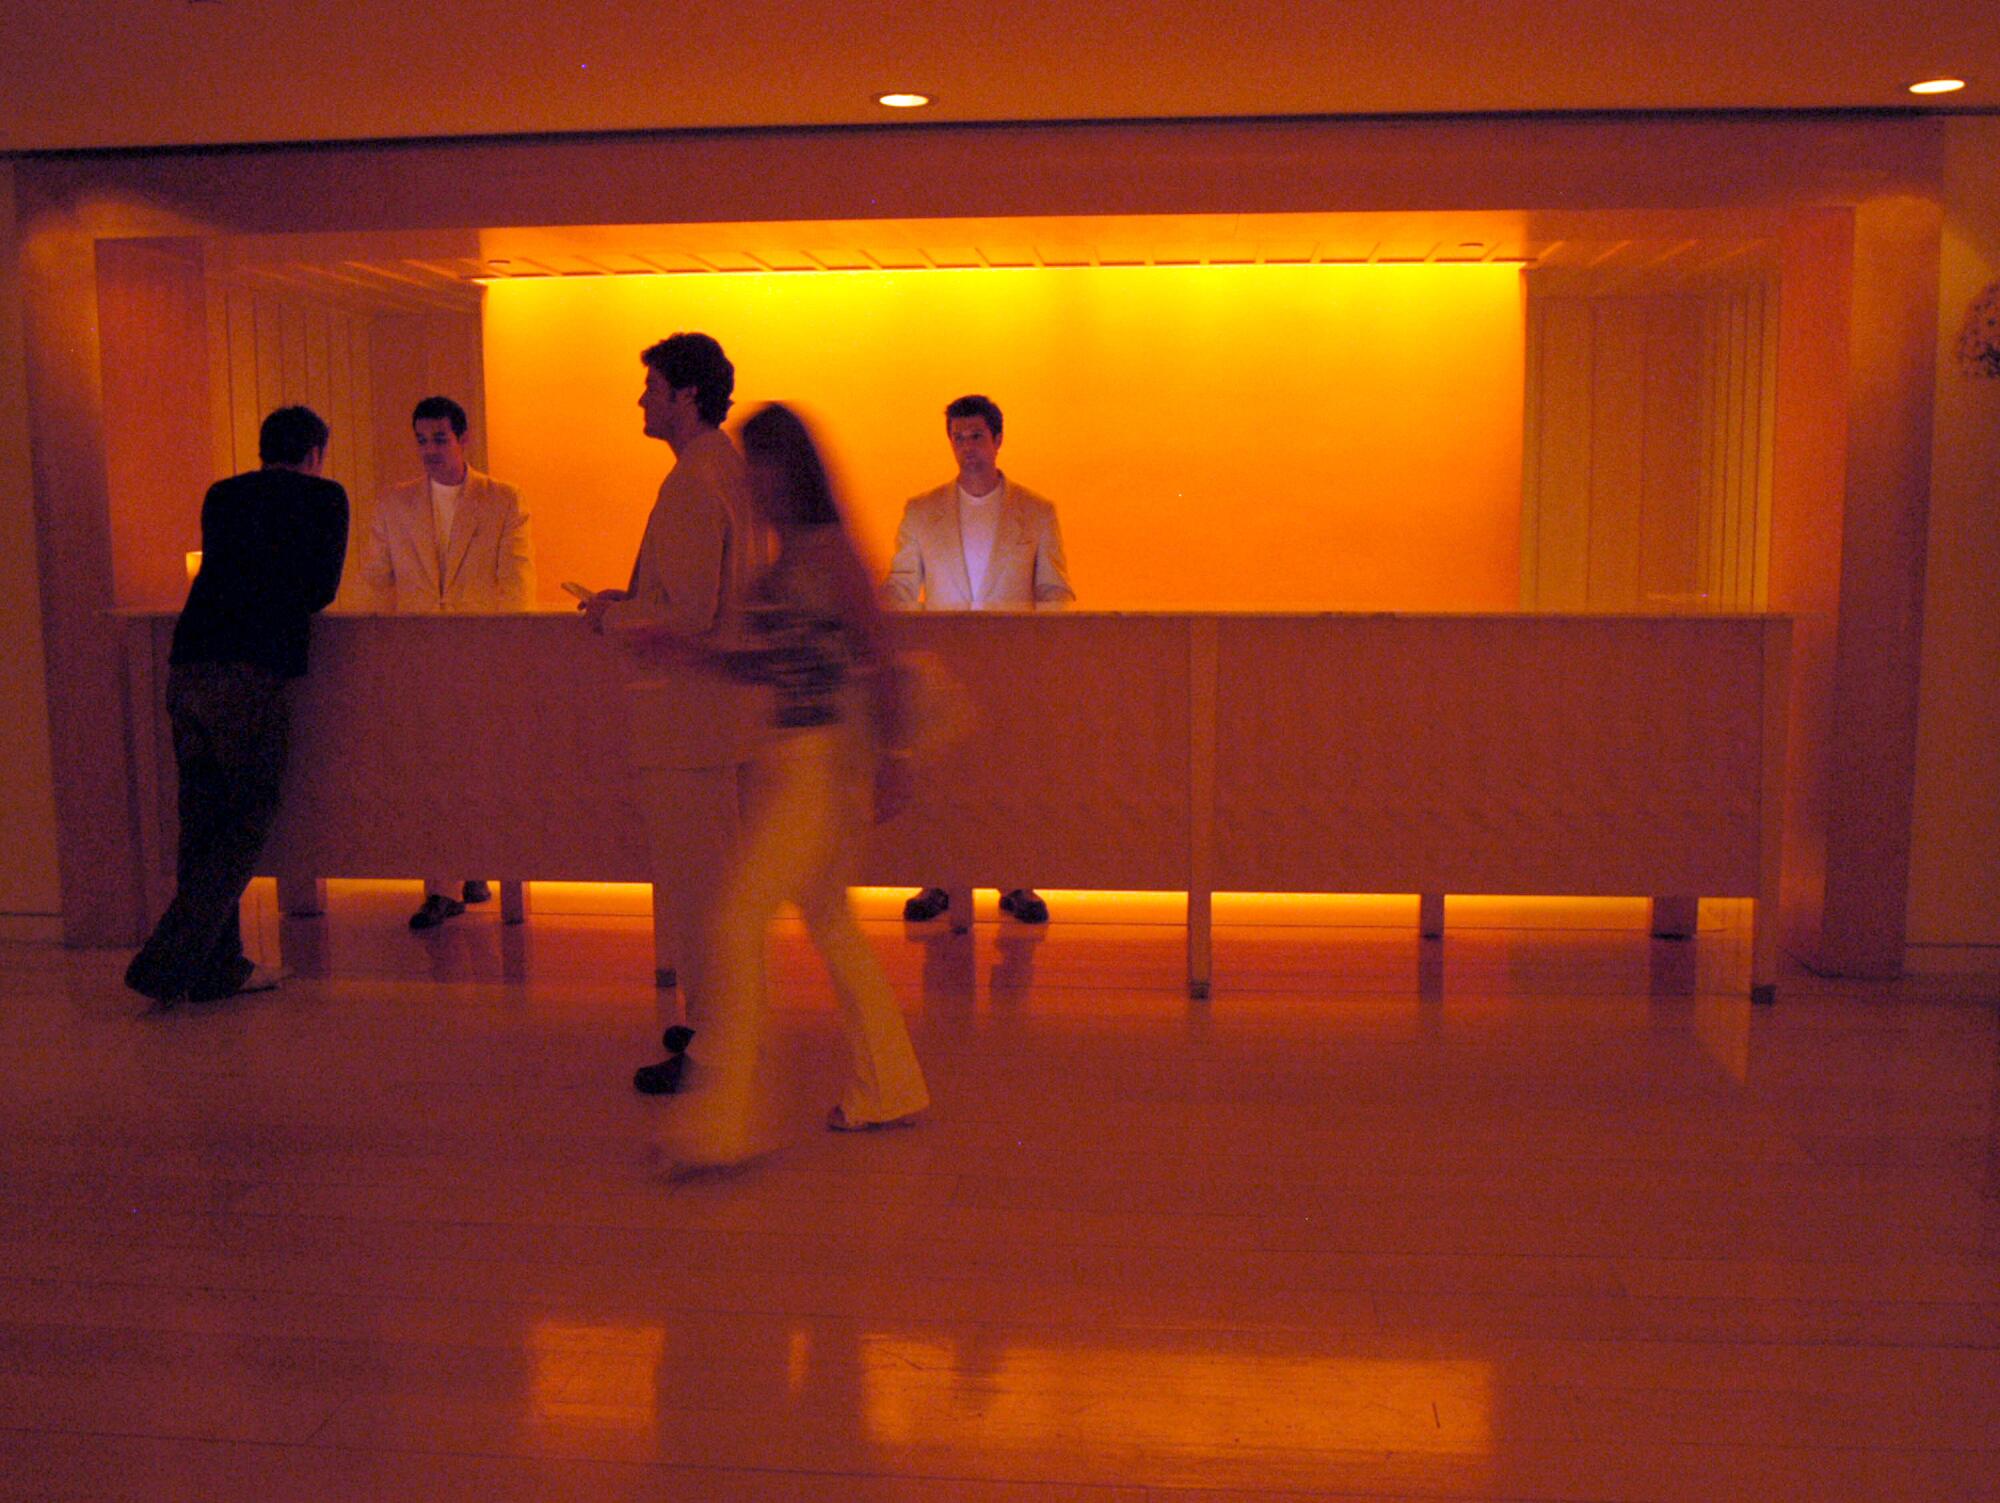 The lobby of the Mondrian Hotel in a moody orange hue. Two staff members stand behind a long desk while guests pass by.